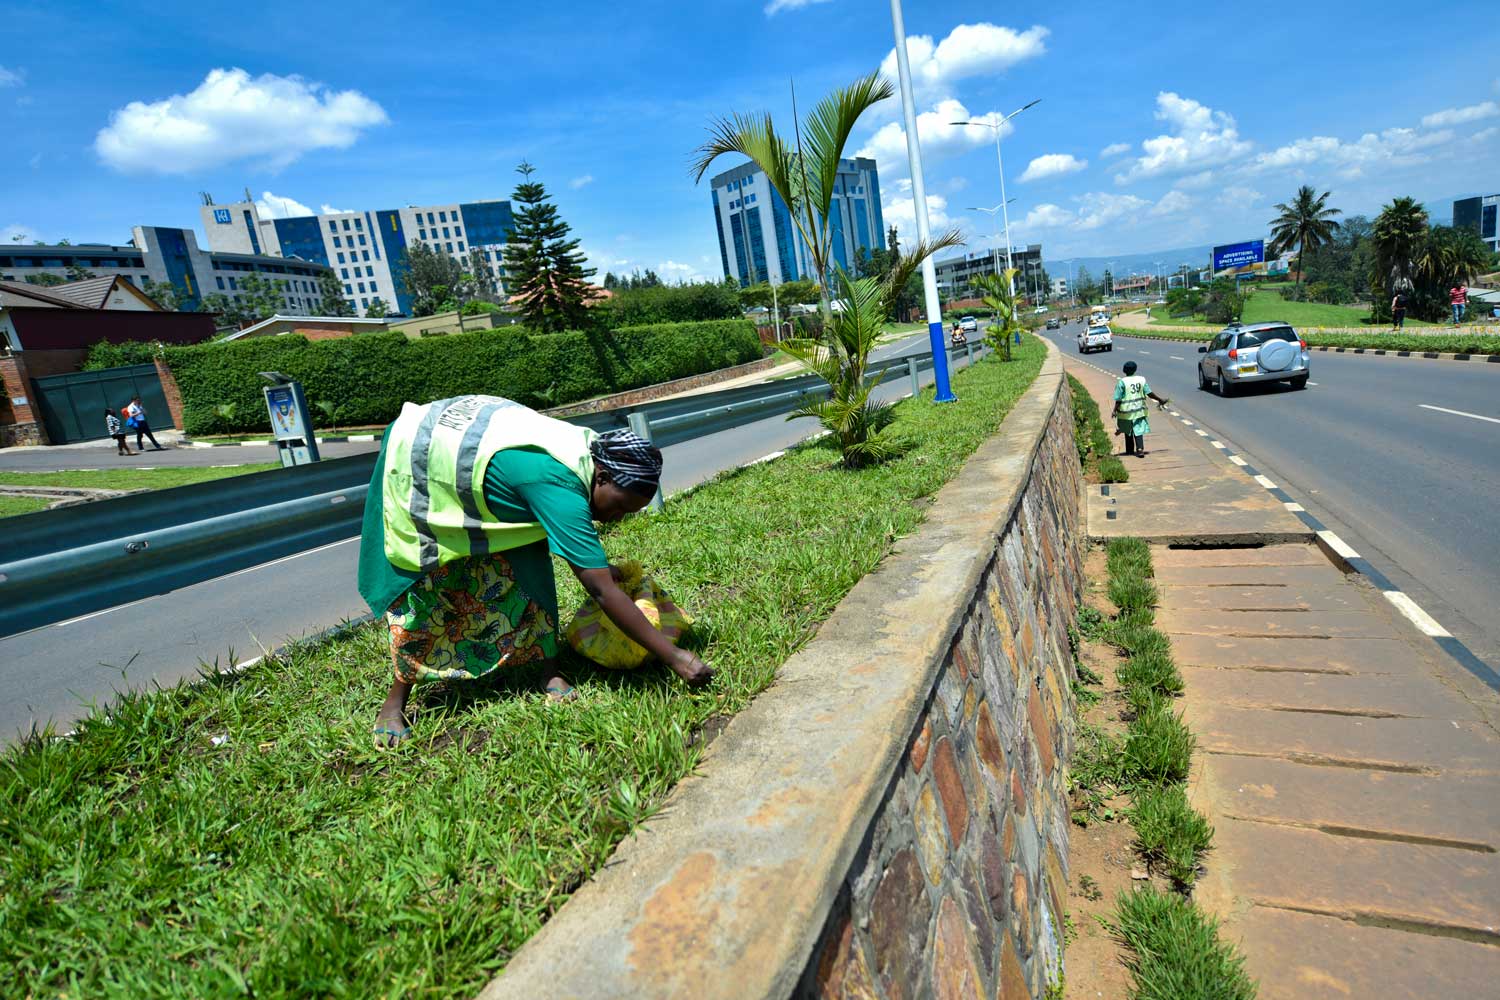 Kigali - Cleanest City In Africa - Facts